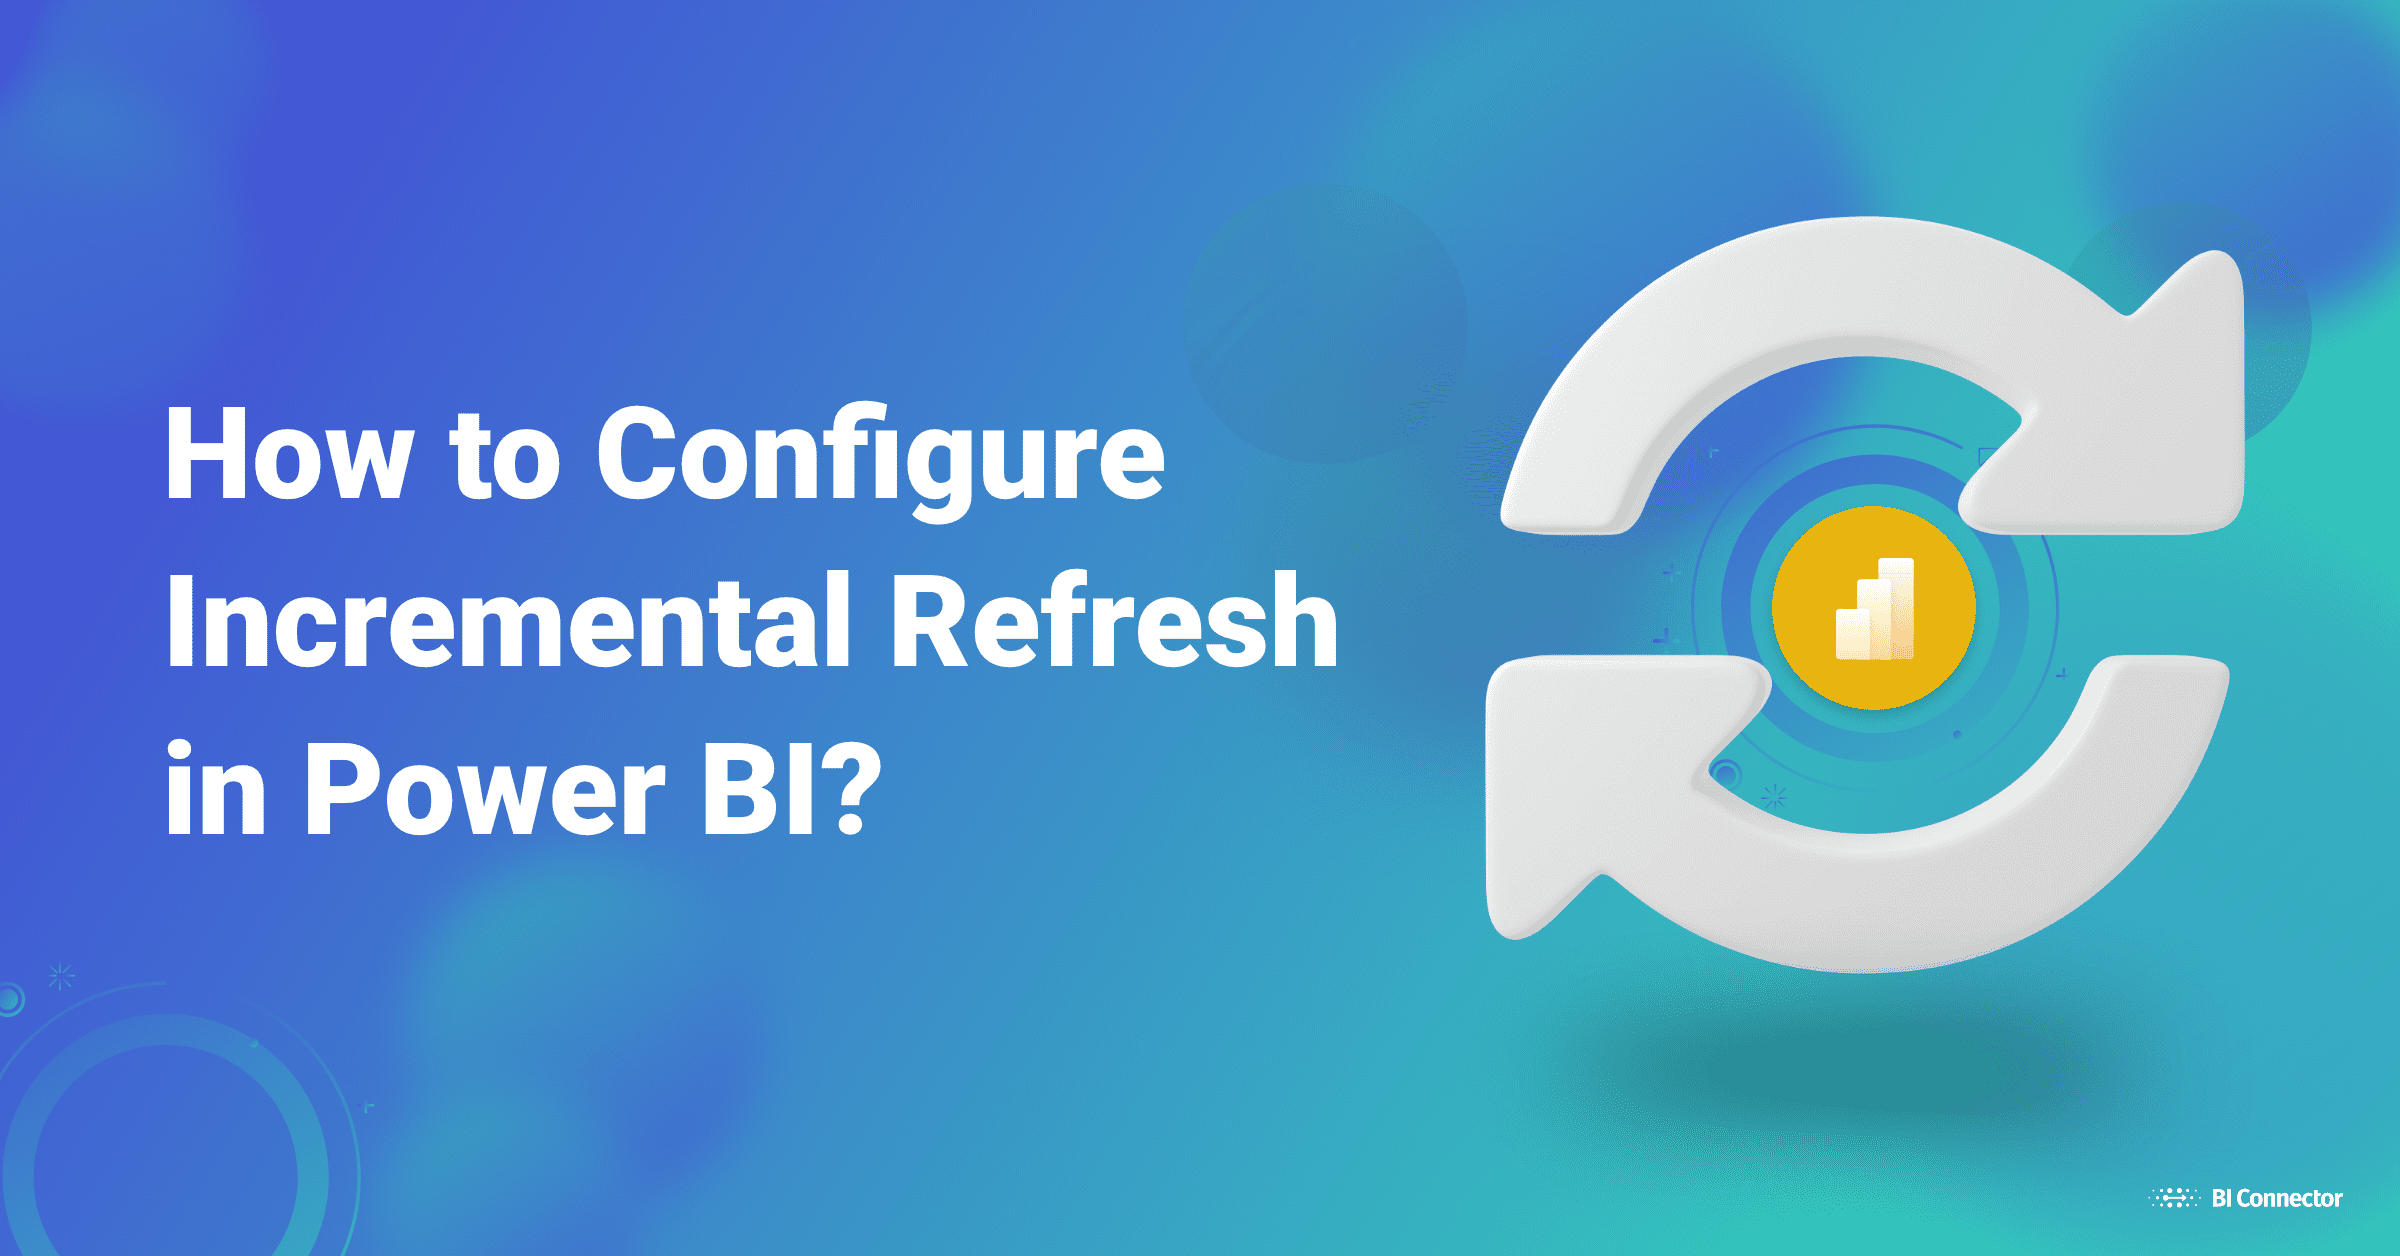 How to Configure Incremental Refresh in Power BI?